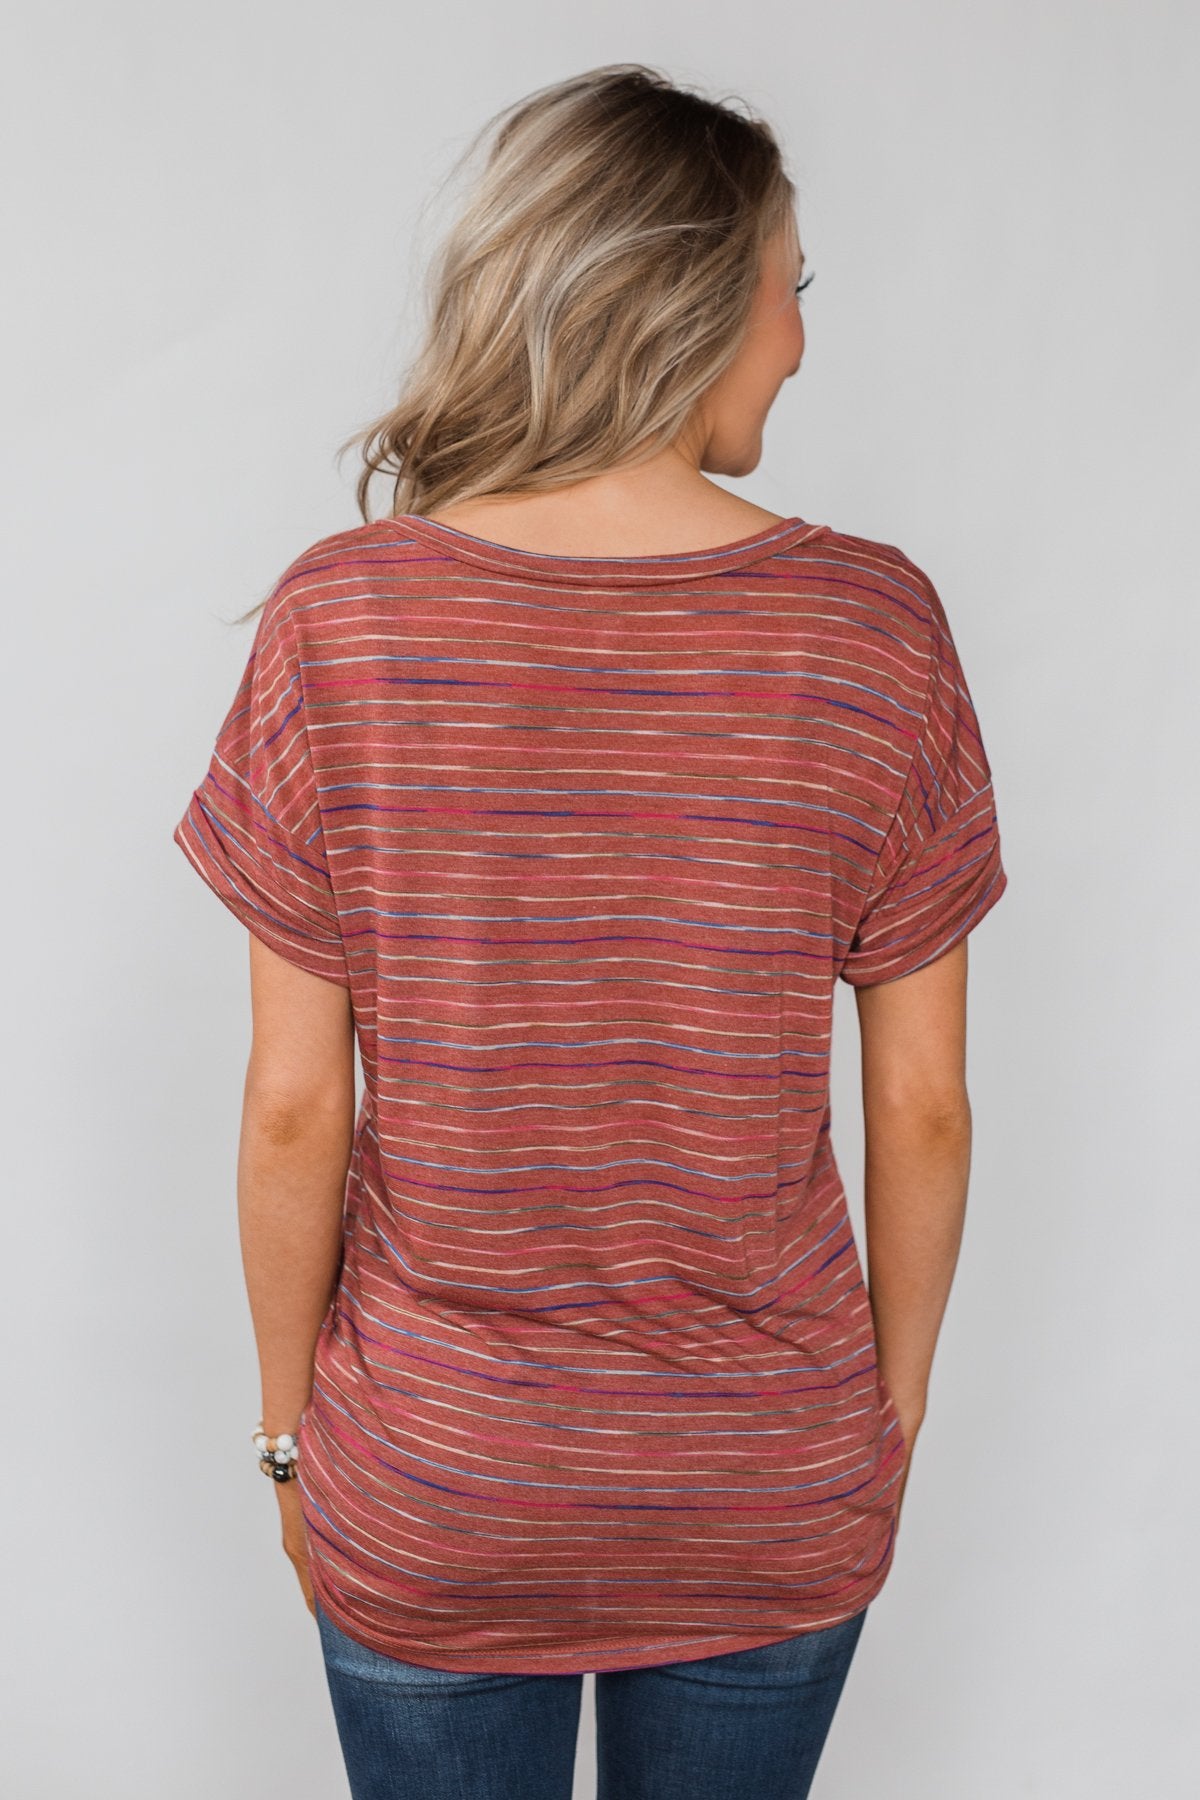 Get The Party Started Striped Pocket Tee - Brick